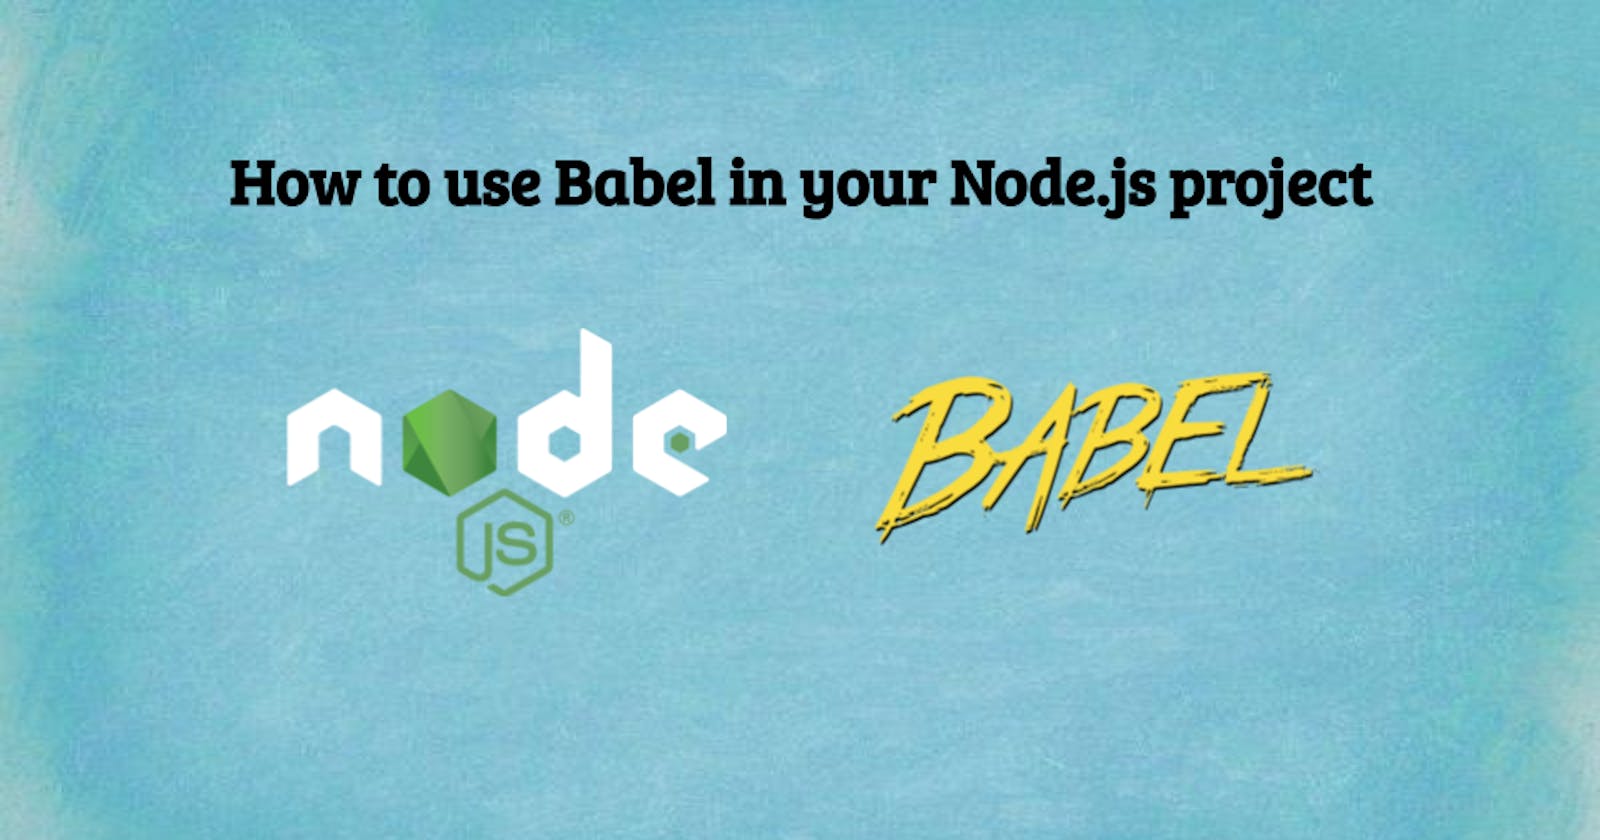 How to use Babel in your Node.js project